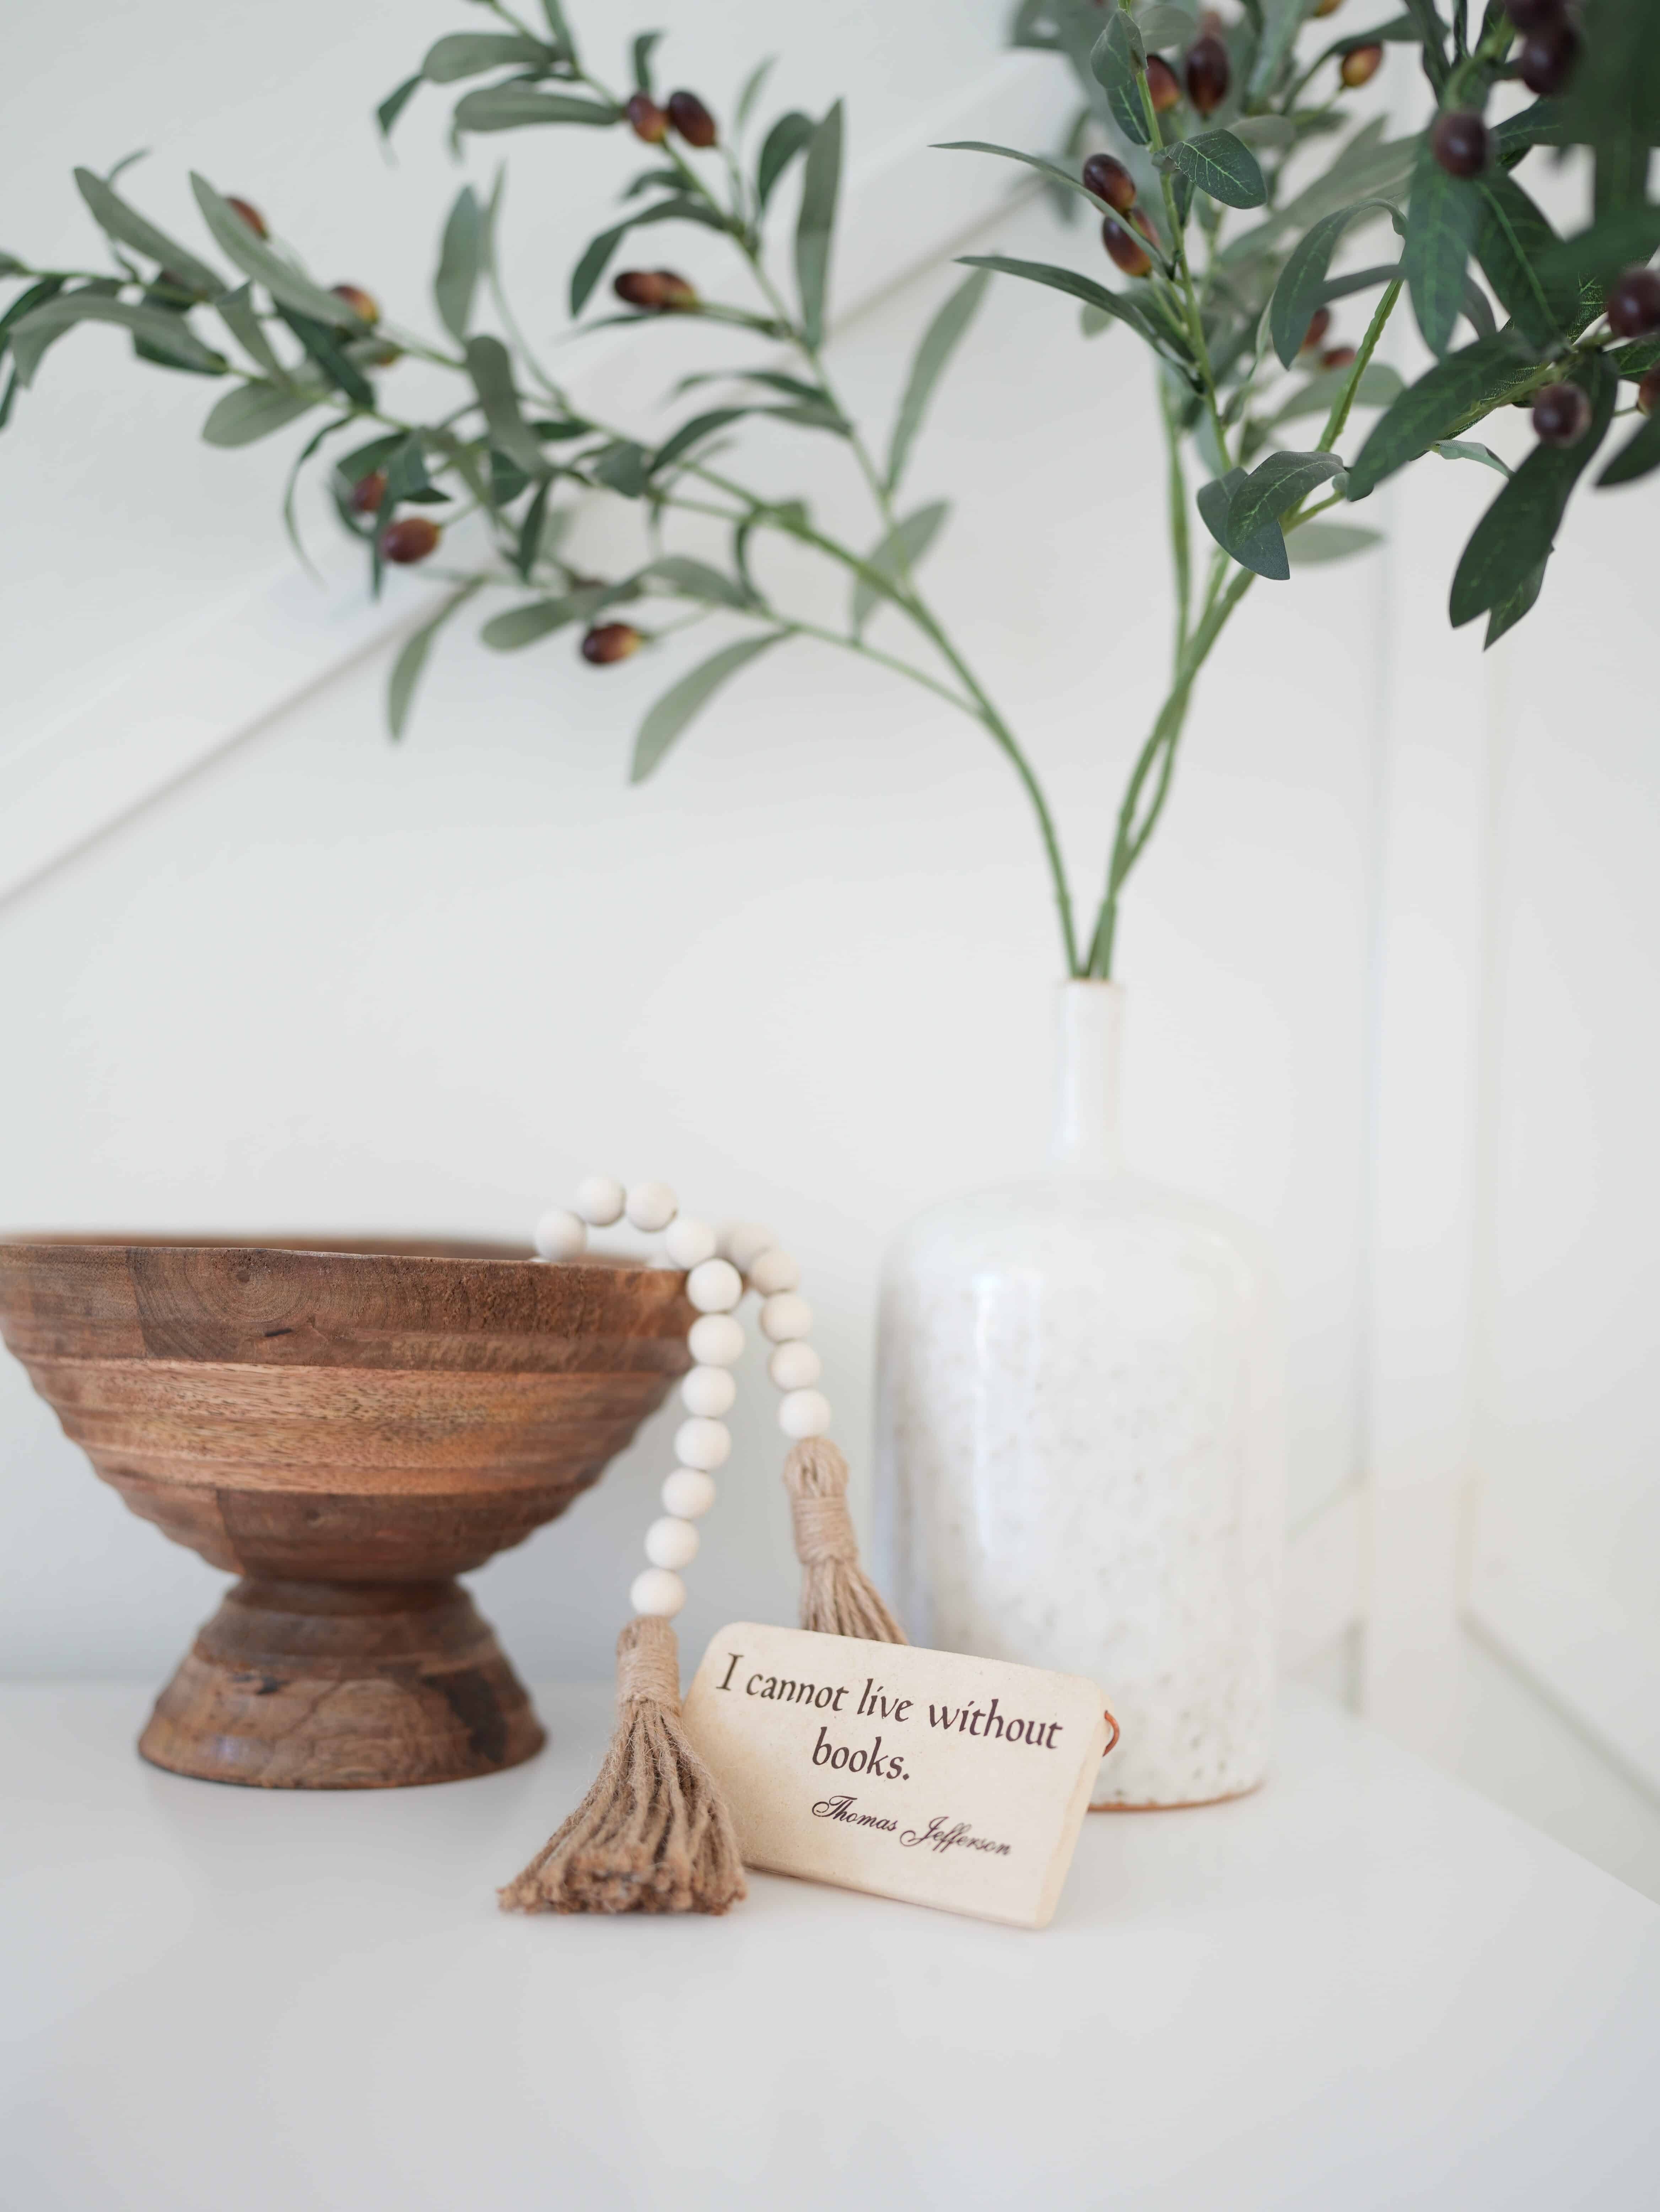 Brown decorative bowl with decorative beaded string spilling out of it. Next to a small beige bookish sign that reads "I cannot live without books" - Thomas Jefferson, in front of a tall white vase with faux green stems, sitting on top of a white table against a white wall.